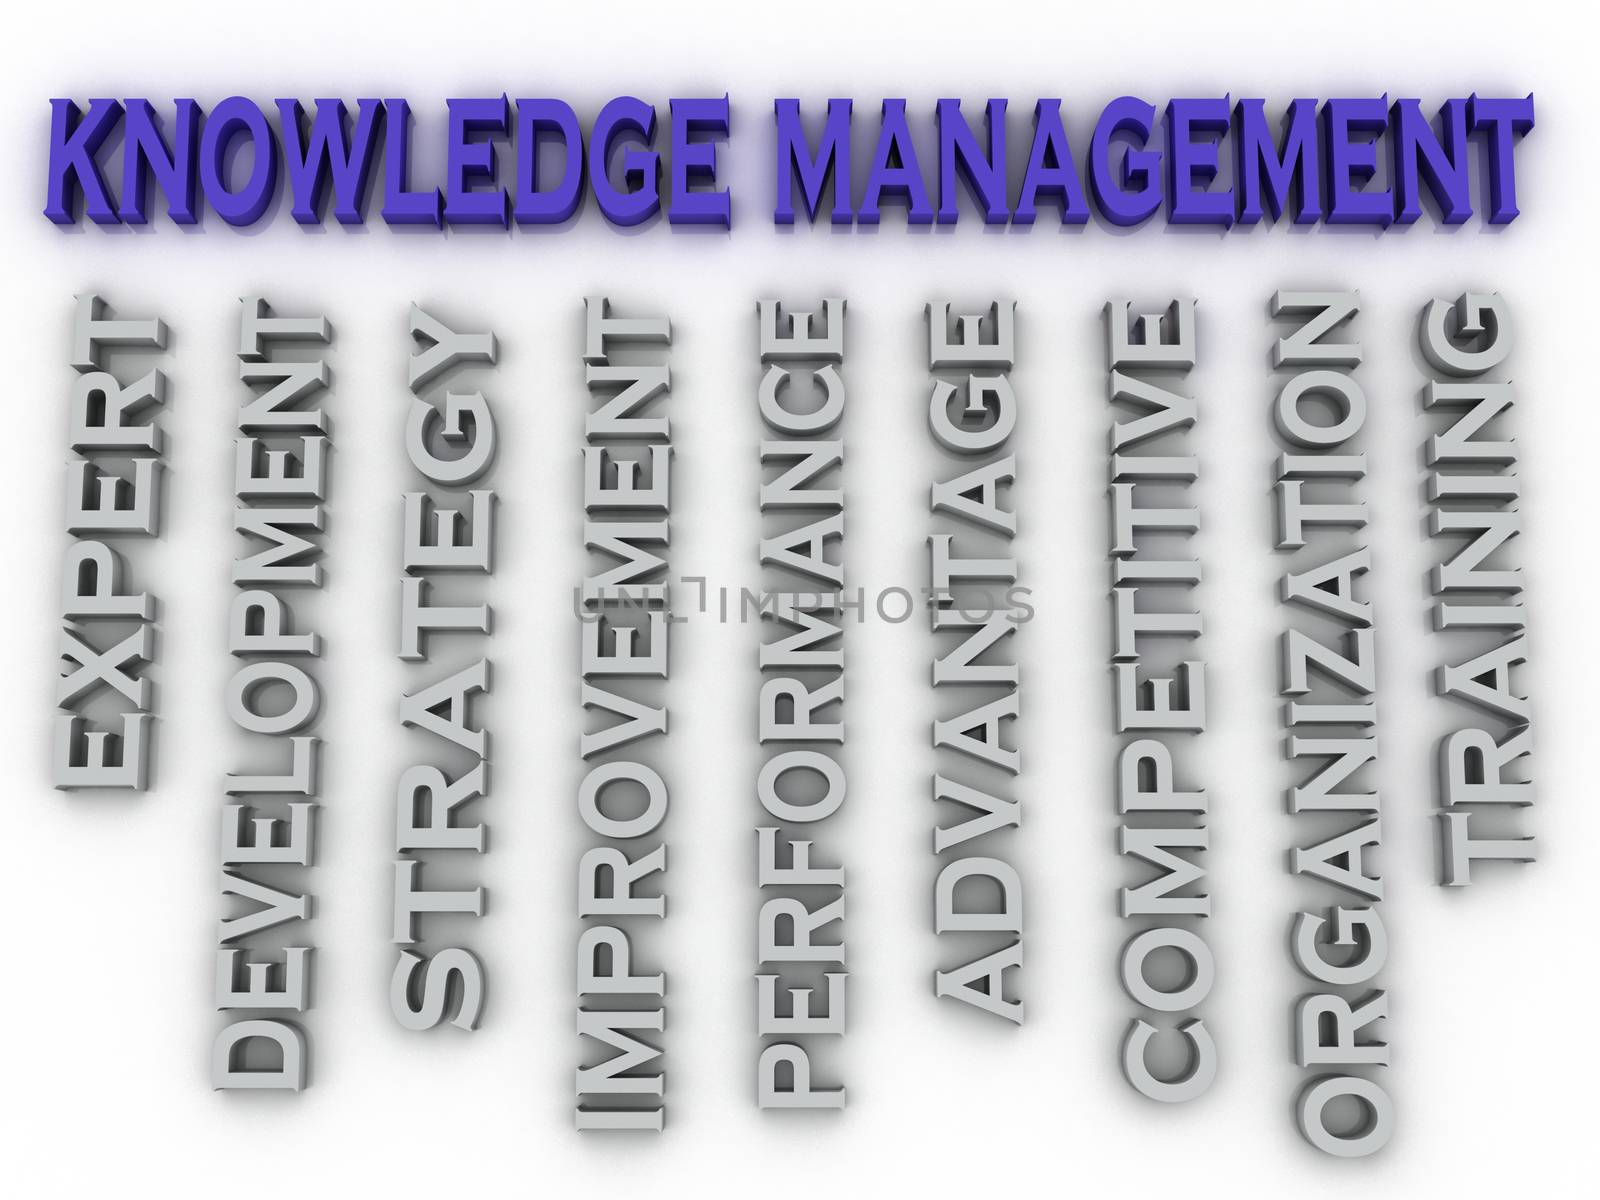 3d image knowledge management issues concept word cloud background